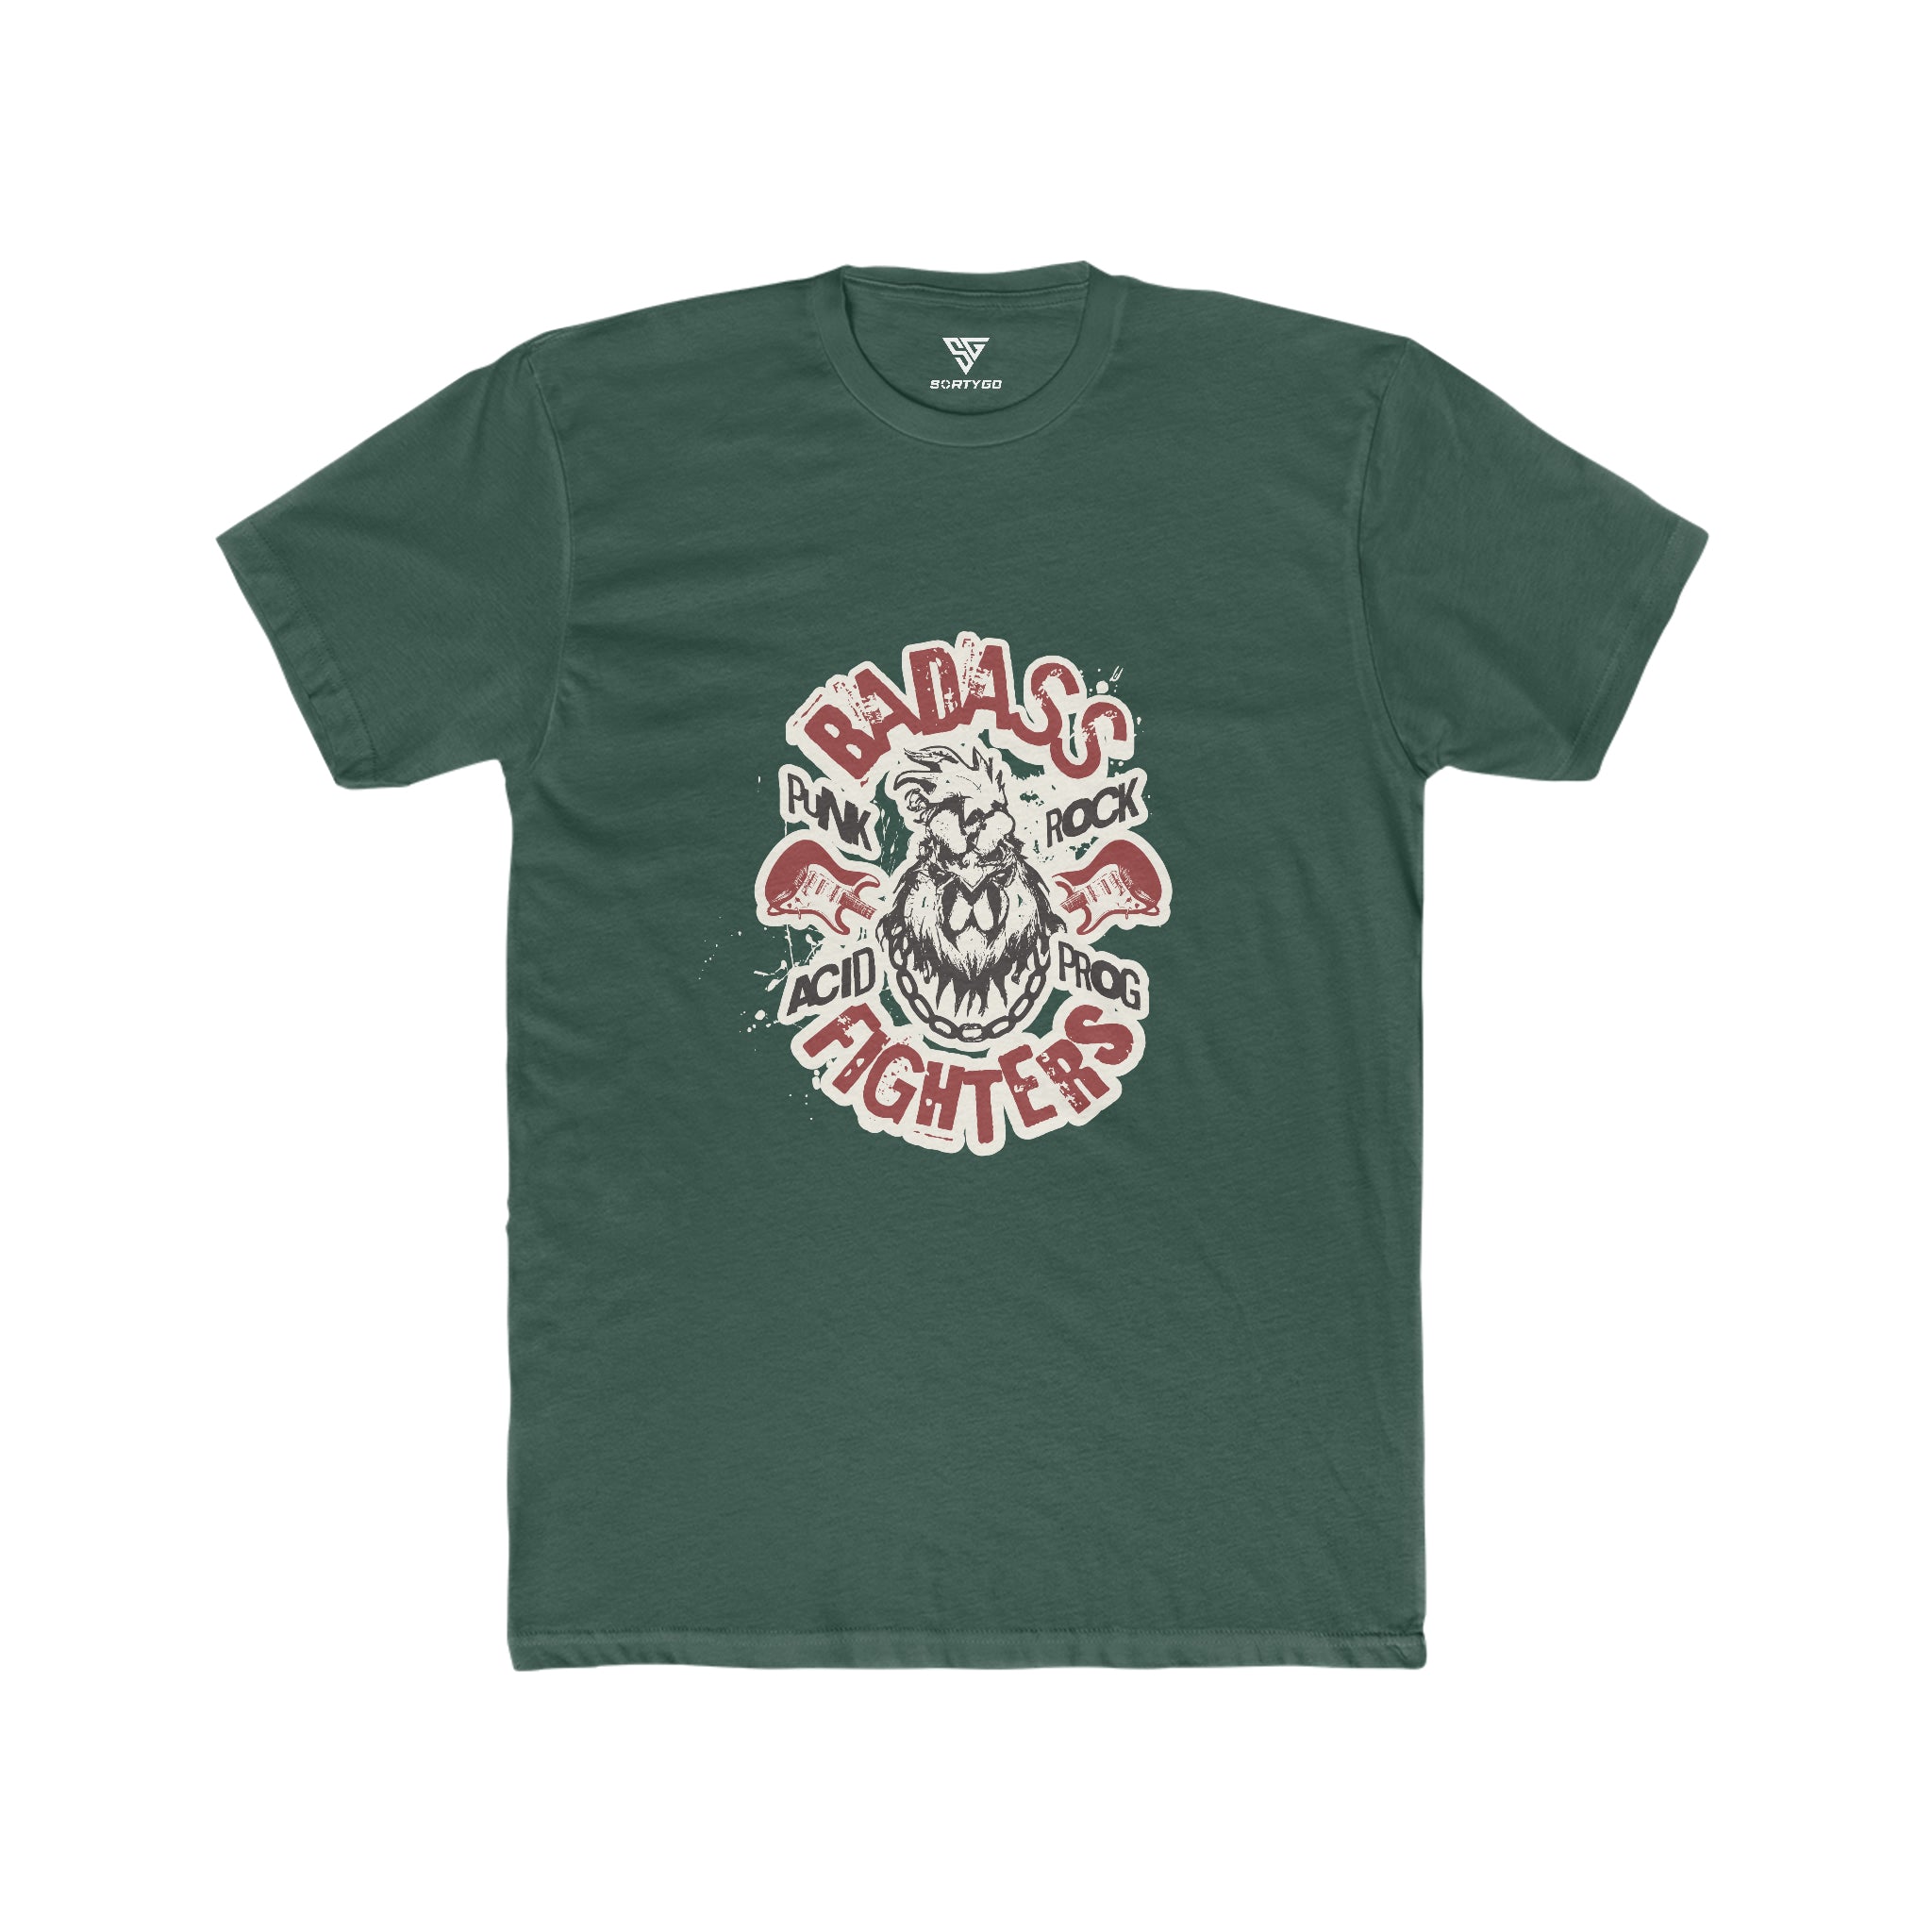 SORTYGO - Badass Fighters Men Fitted T-Shirt in Solid Forest Green